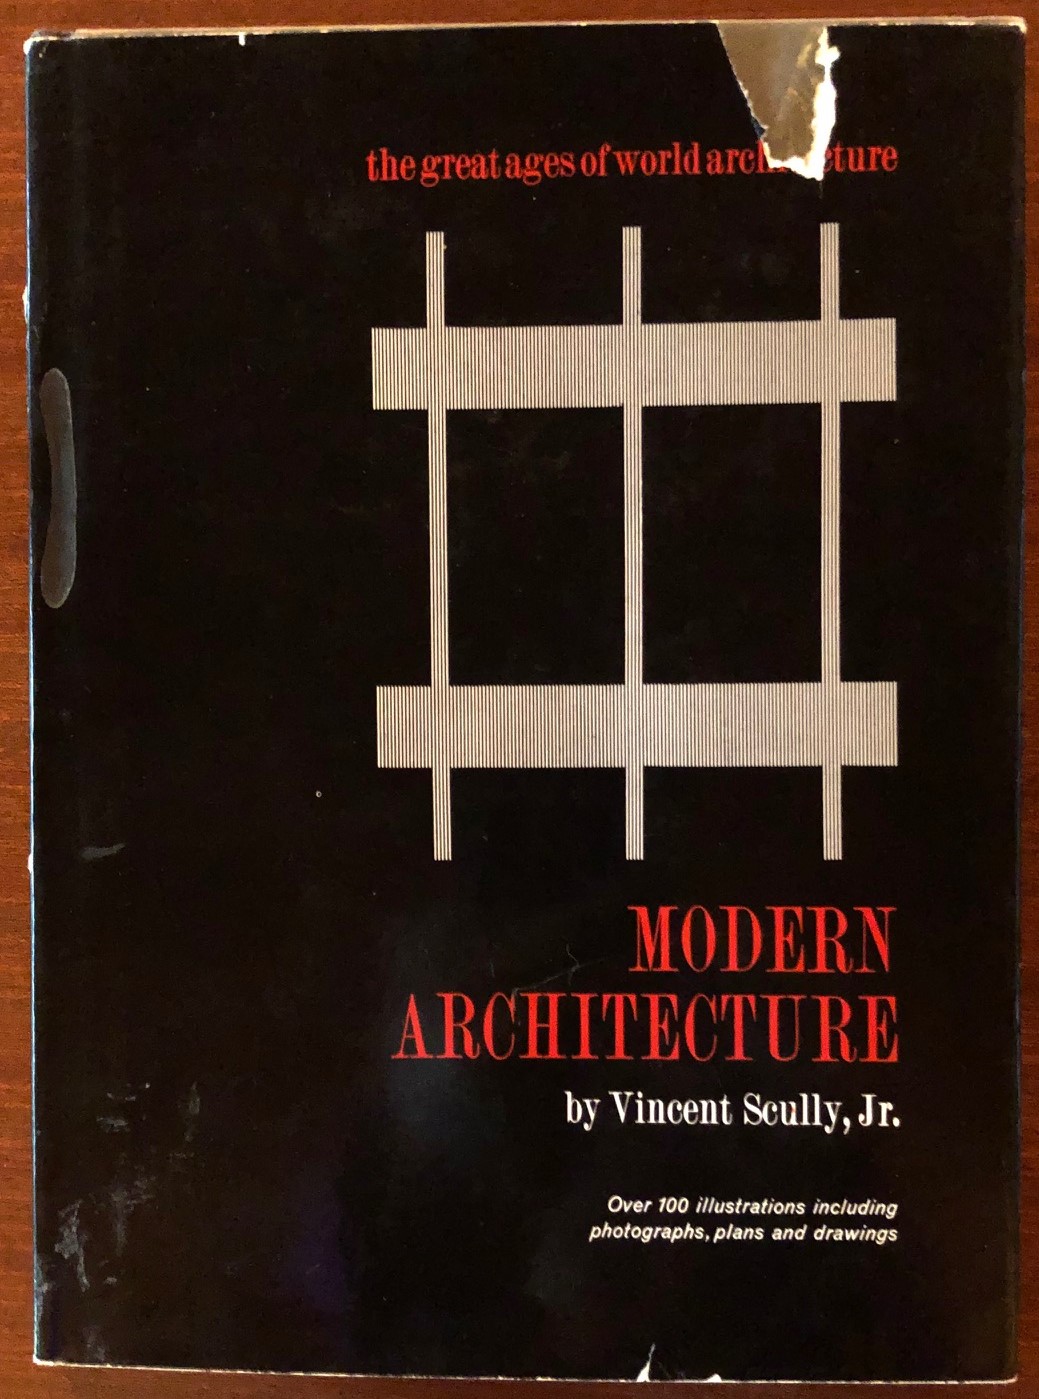 Modern Architecture - Turn of the Century Editions